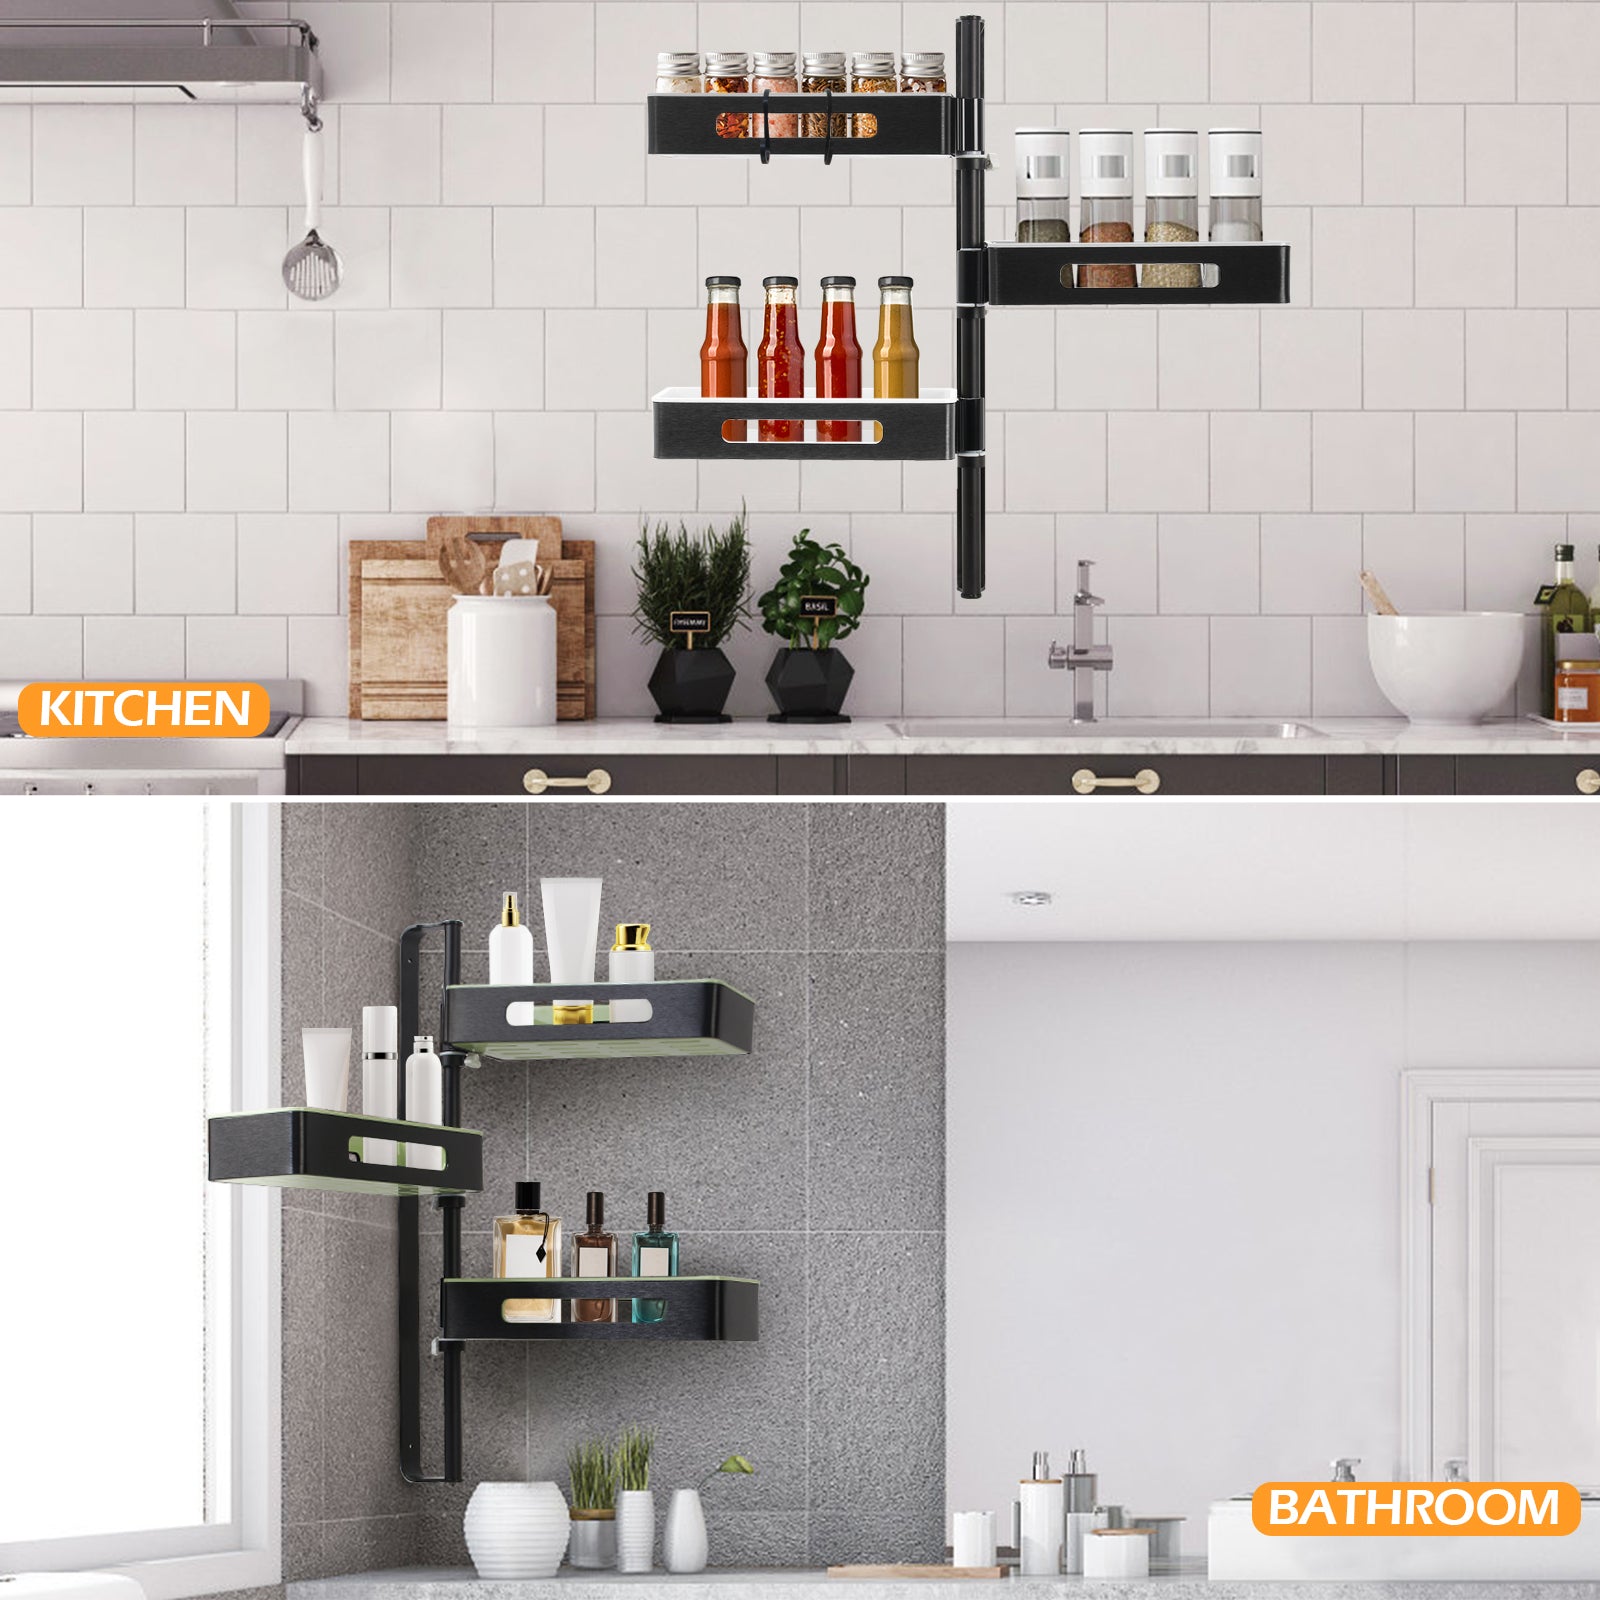 Todeco-Shower-Organizer-Holder-Punch-Free-Wall-Mounted-Bathroom-Storage-Shelf-3-Tier-Height-Adjustable-Kitchen-Storage-Spice-Rack-for-Living-Room-Balcony